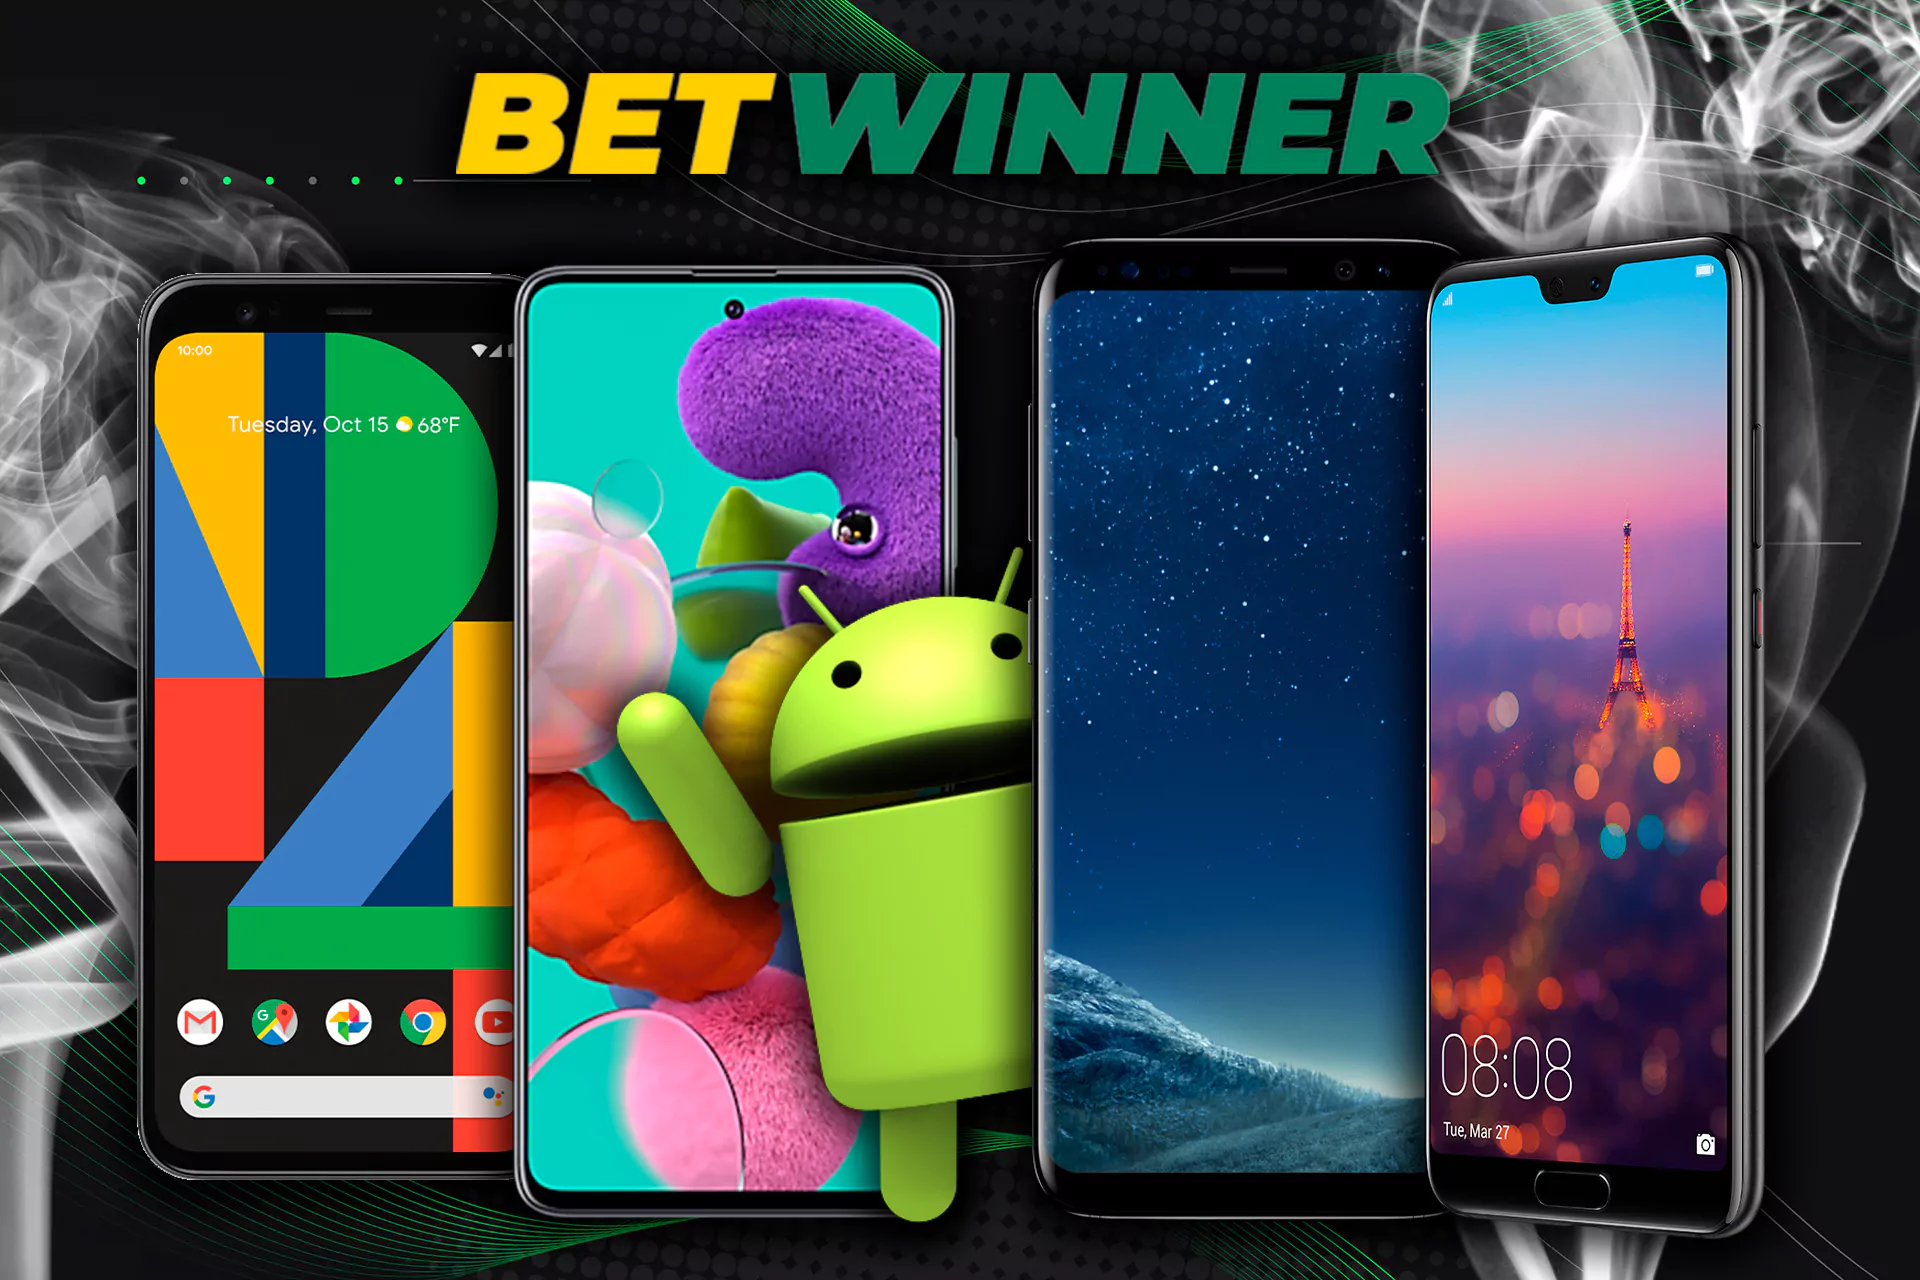 You can use any of these devices to install the Betwinner app.